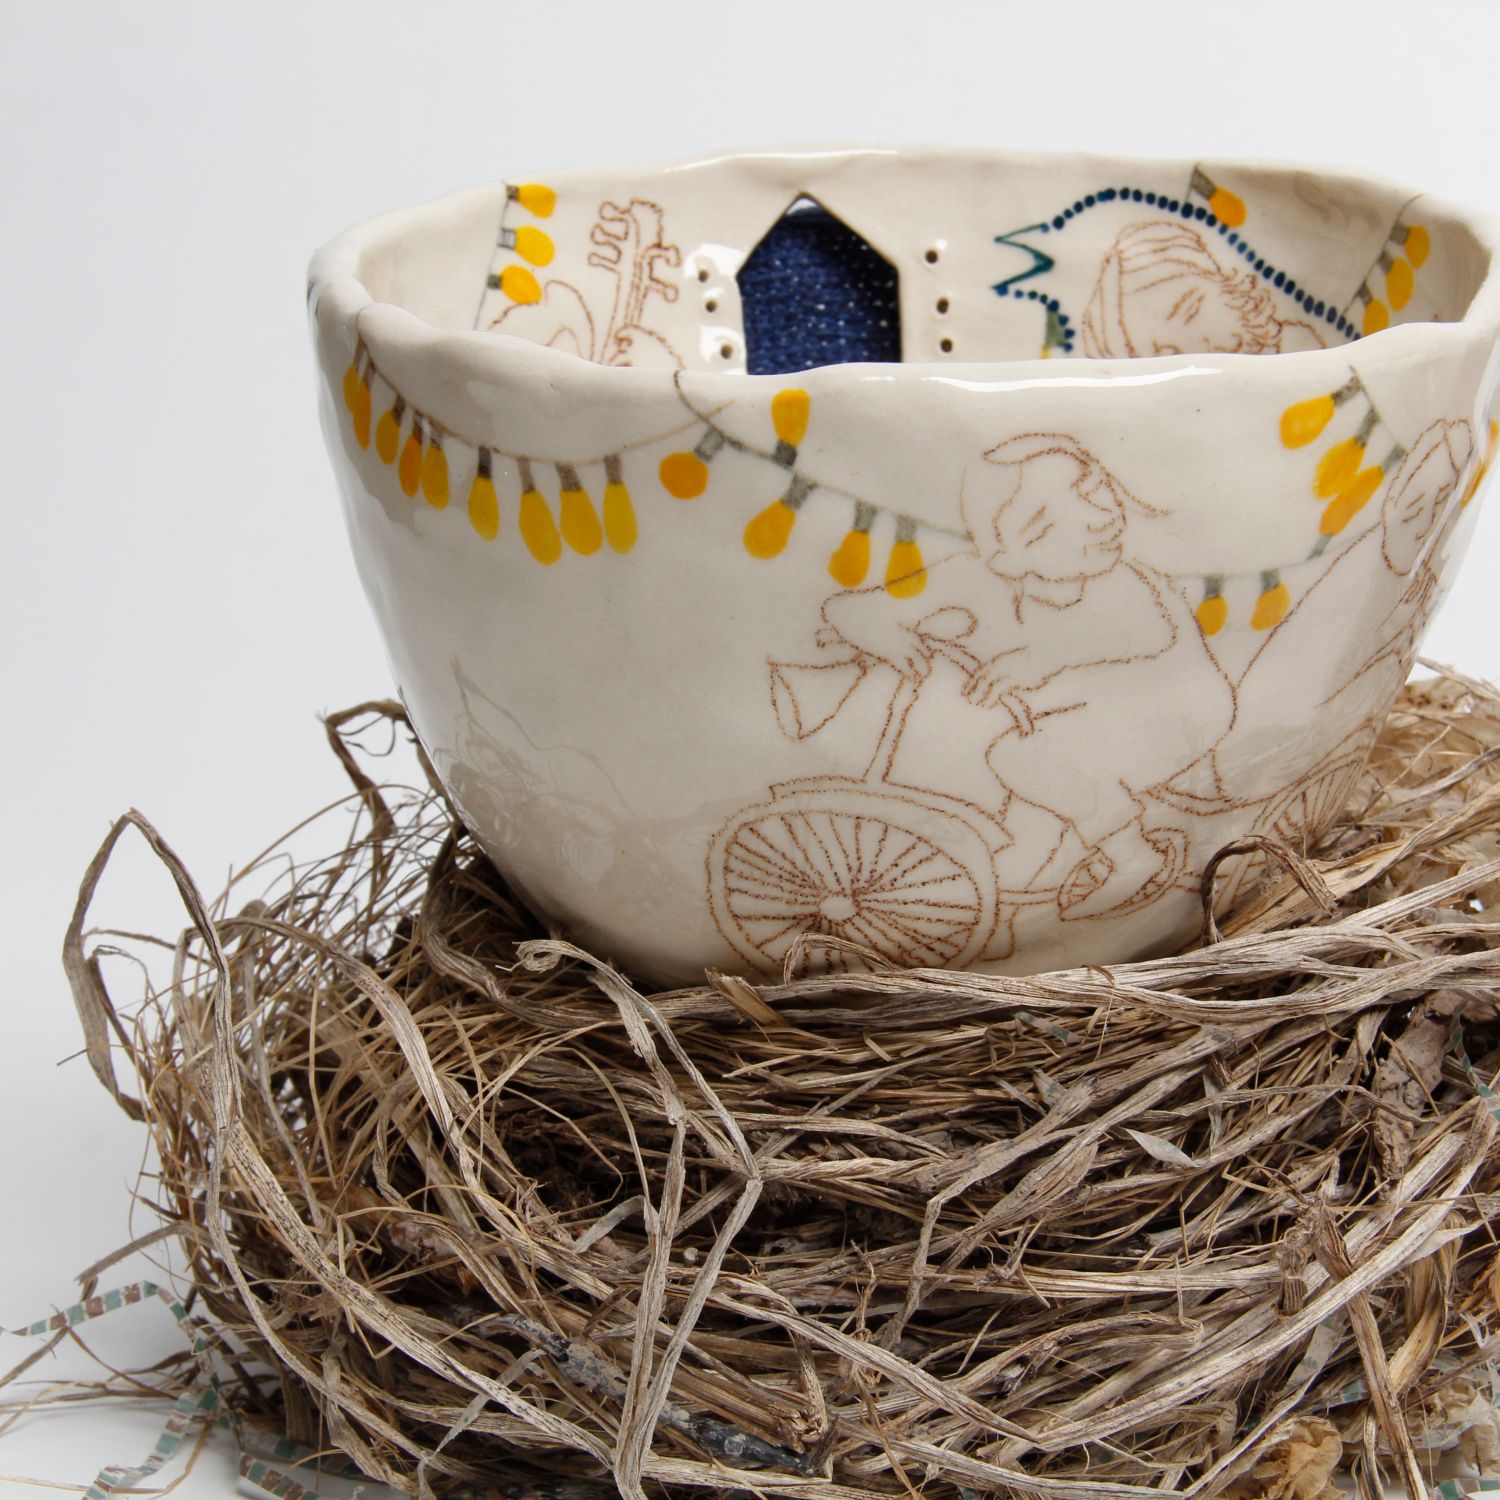 Japneet Kaur: Nesting Bowl – Hollow Bowl (Each sold separately) Product Image 5 of 7